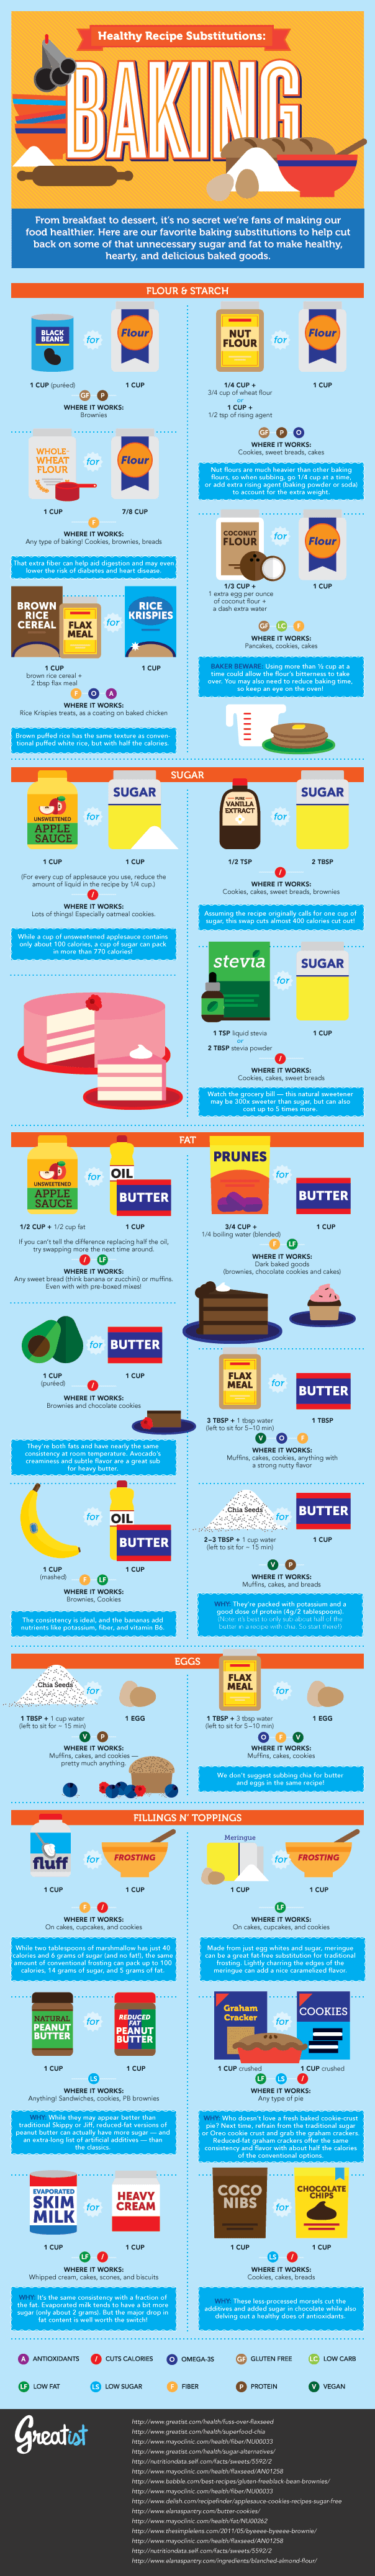 Healthy Baking Substitutions